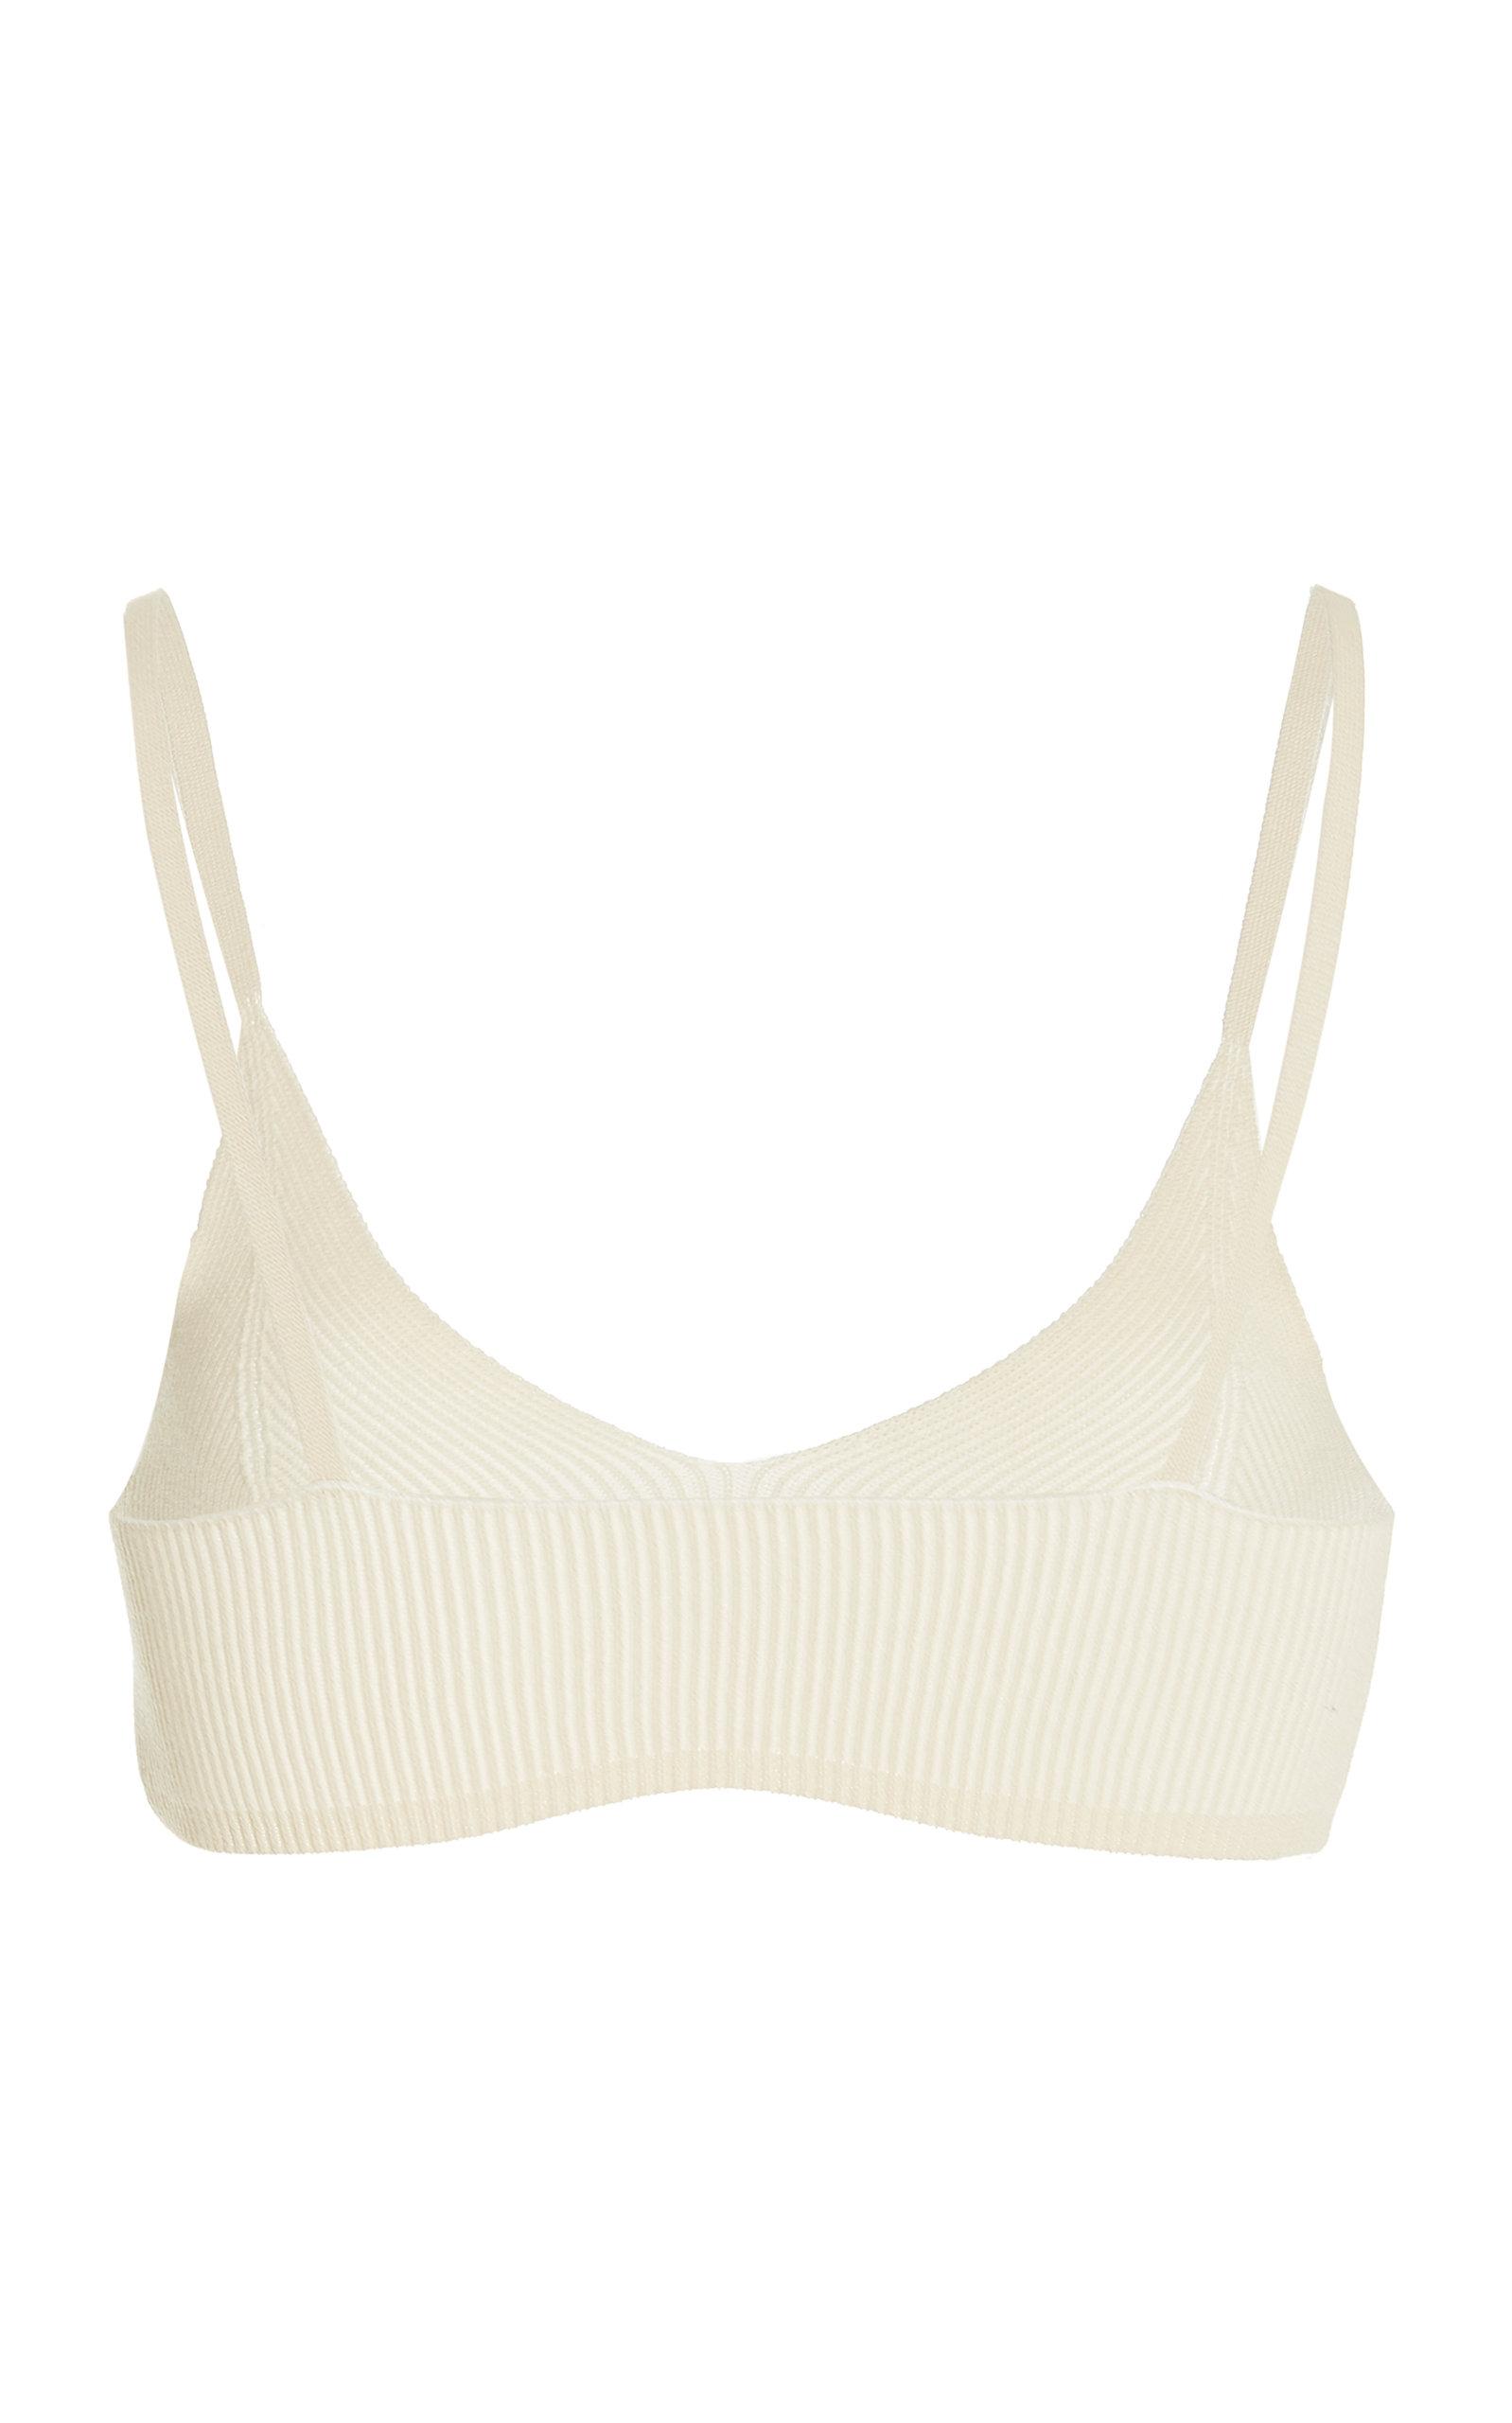 Jacquemus Synthetic Valensole Knit Bra Top in Natural - Lyst